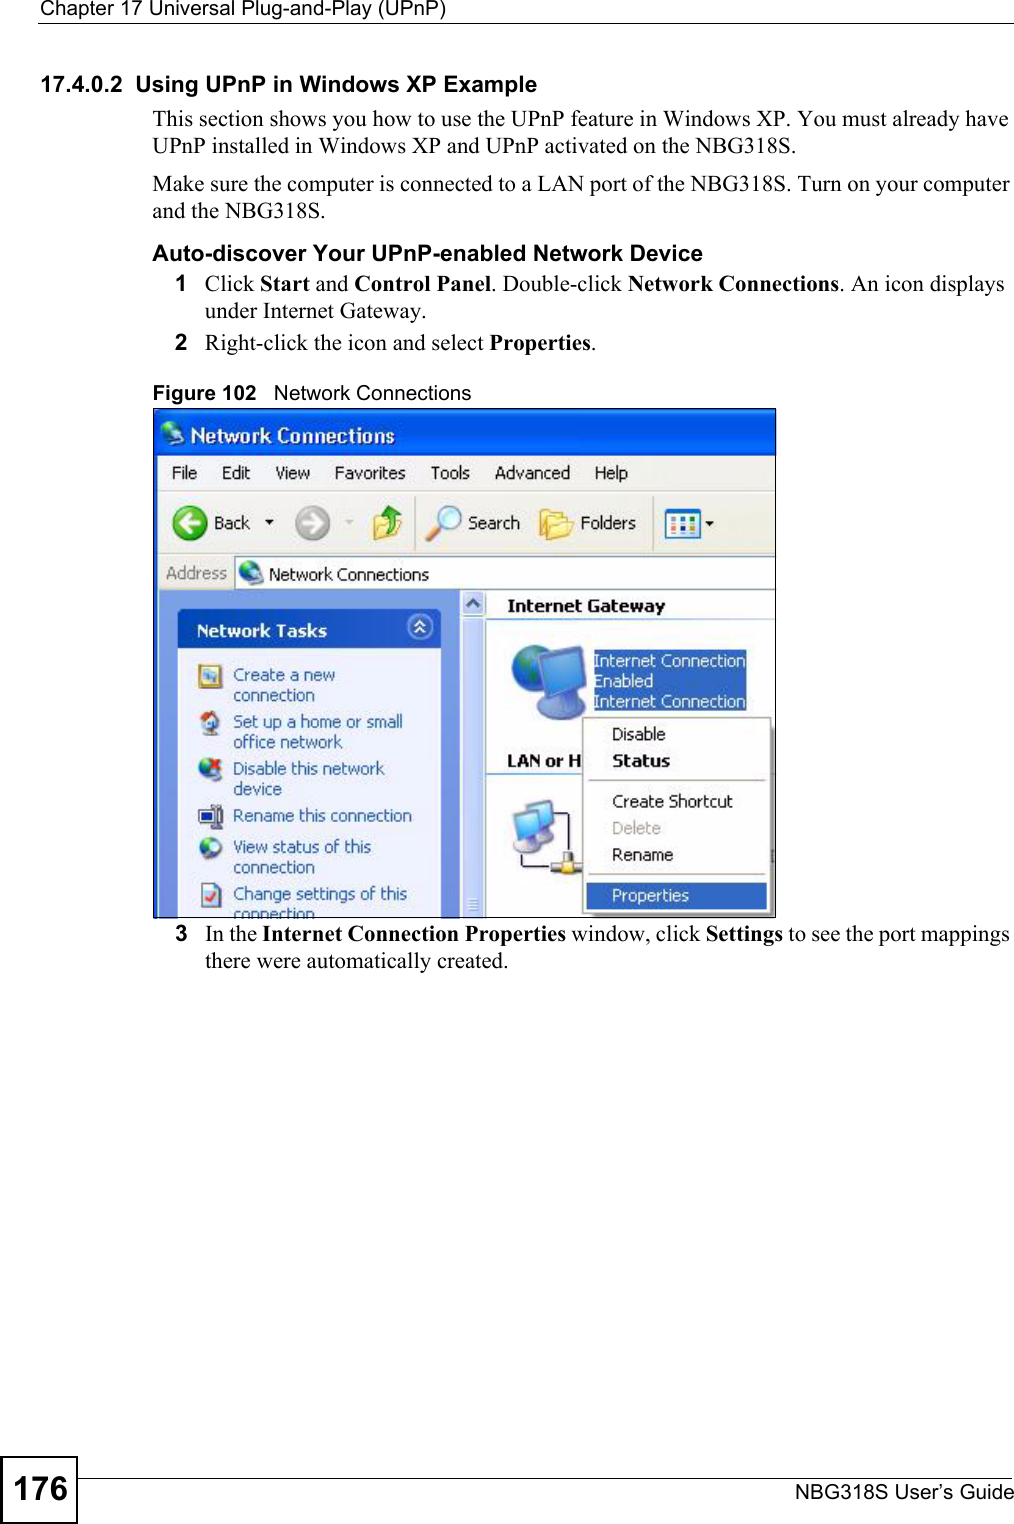 Chapter 17 Universal Plug-and-Play (UPnP)NBG318S User’s Guide17617.4.0.2  Using UPnP in Windows XP ExampleThis section shows you how to use the UPnP feature in Windows XP. You must already have UPnP installed in Windows XP and UPnP activated on the NBG318S.Make sure the computer is connected to a LAN port of the NBG318S. Turn on your computer and the NBG318S. Auto-discover Your UPnP-enabled Network Device1Click Start and Control Panel. Double-click Network Connections. An icon displays under Internet Gateway.2Right-click the icon and select Properties. Figure 102   Network Connections3In the Internet Connection Properties window, click Settings to see the port mappings there were automatically created. 